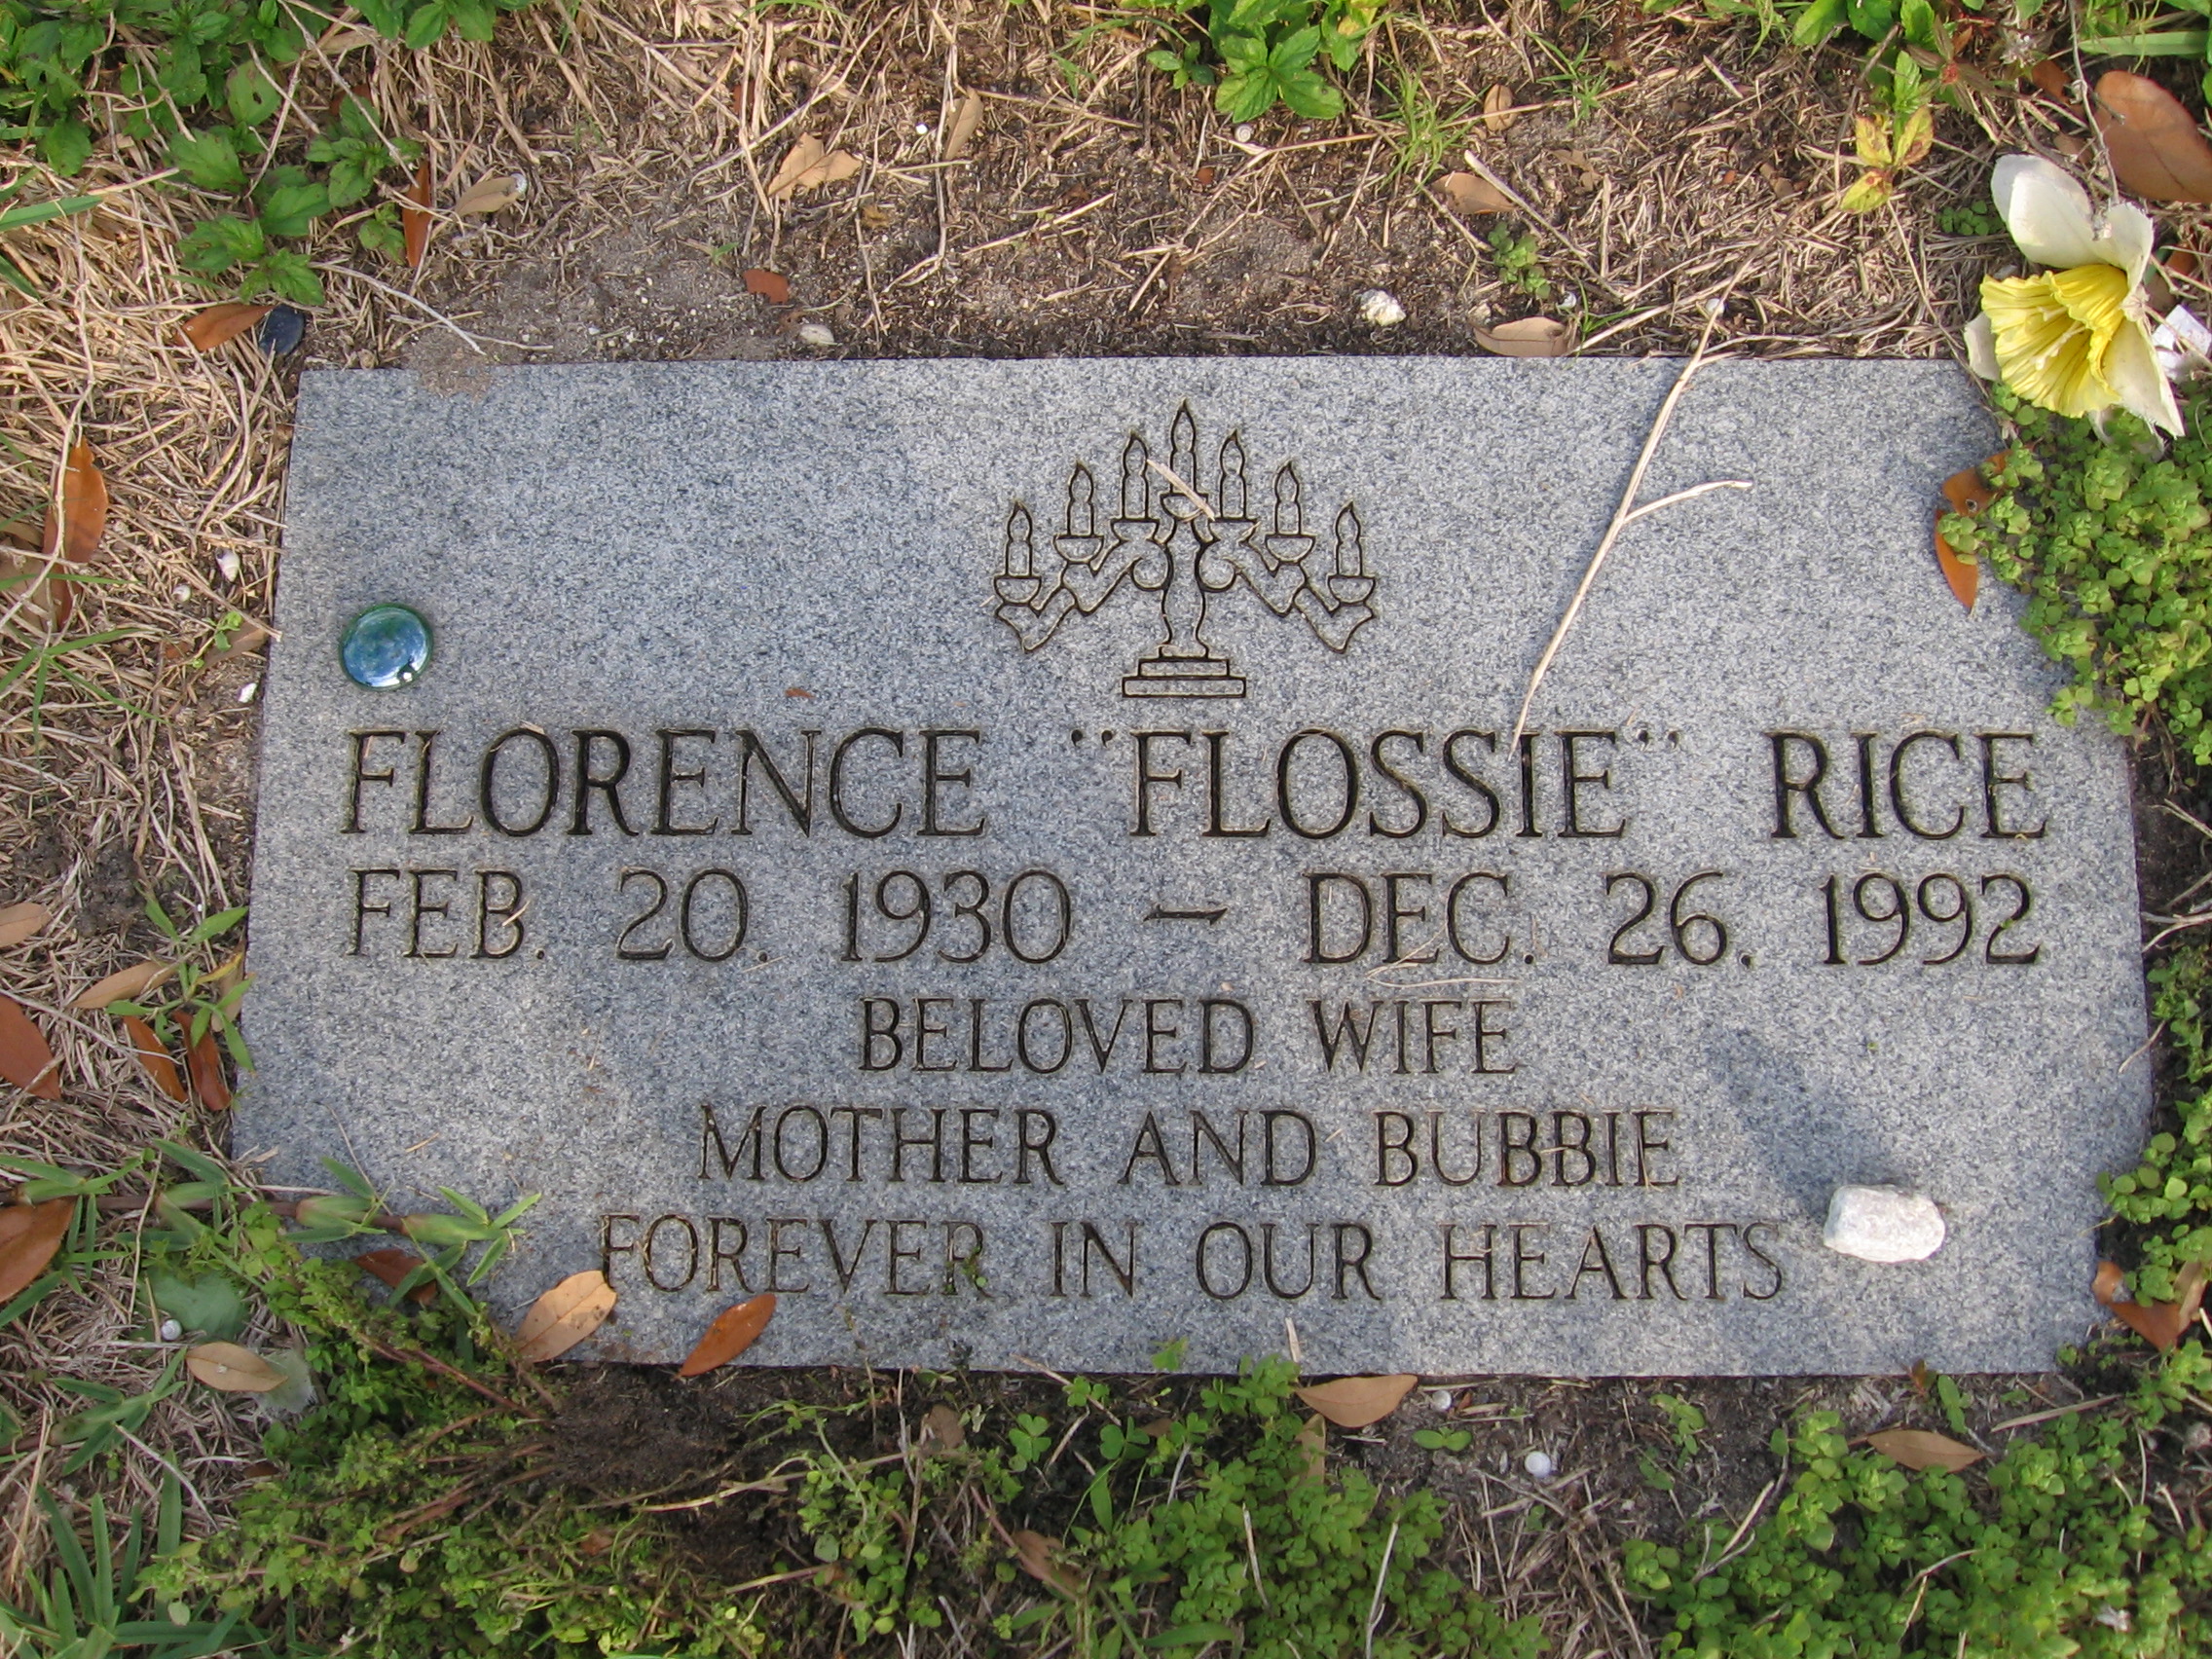 Florence "Flossie" Rice